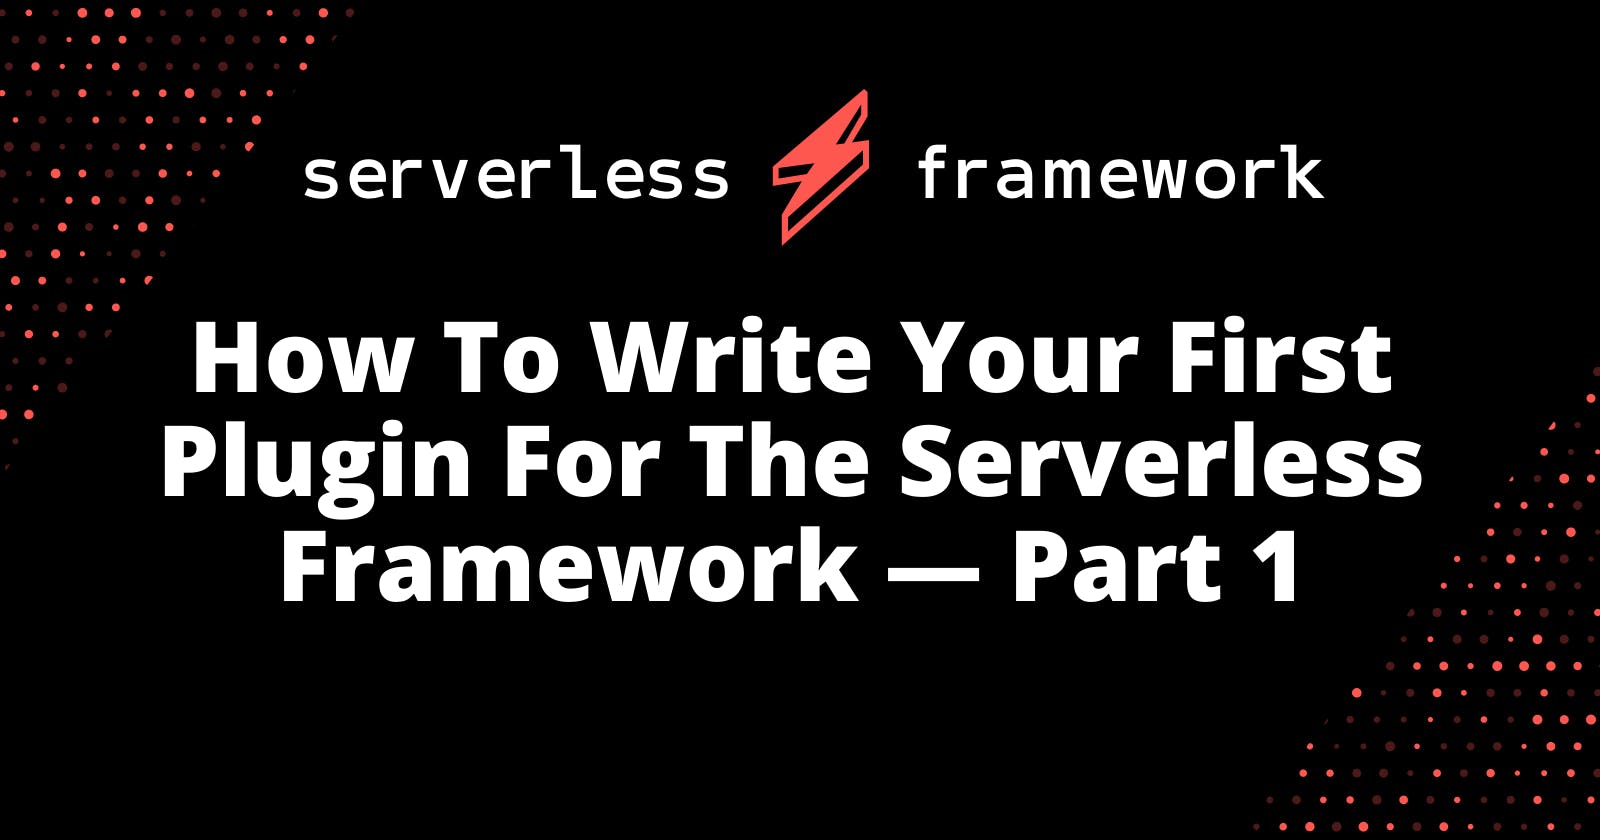 How To Write Your First Plugin For The Serverless Framework — Part 1